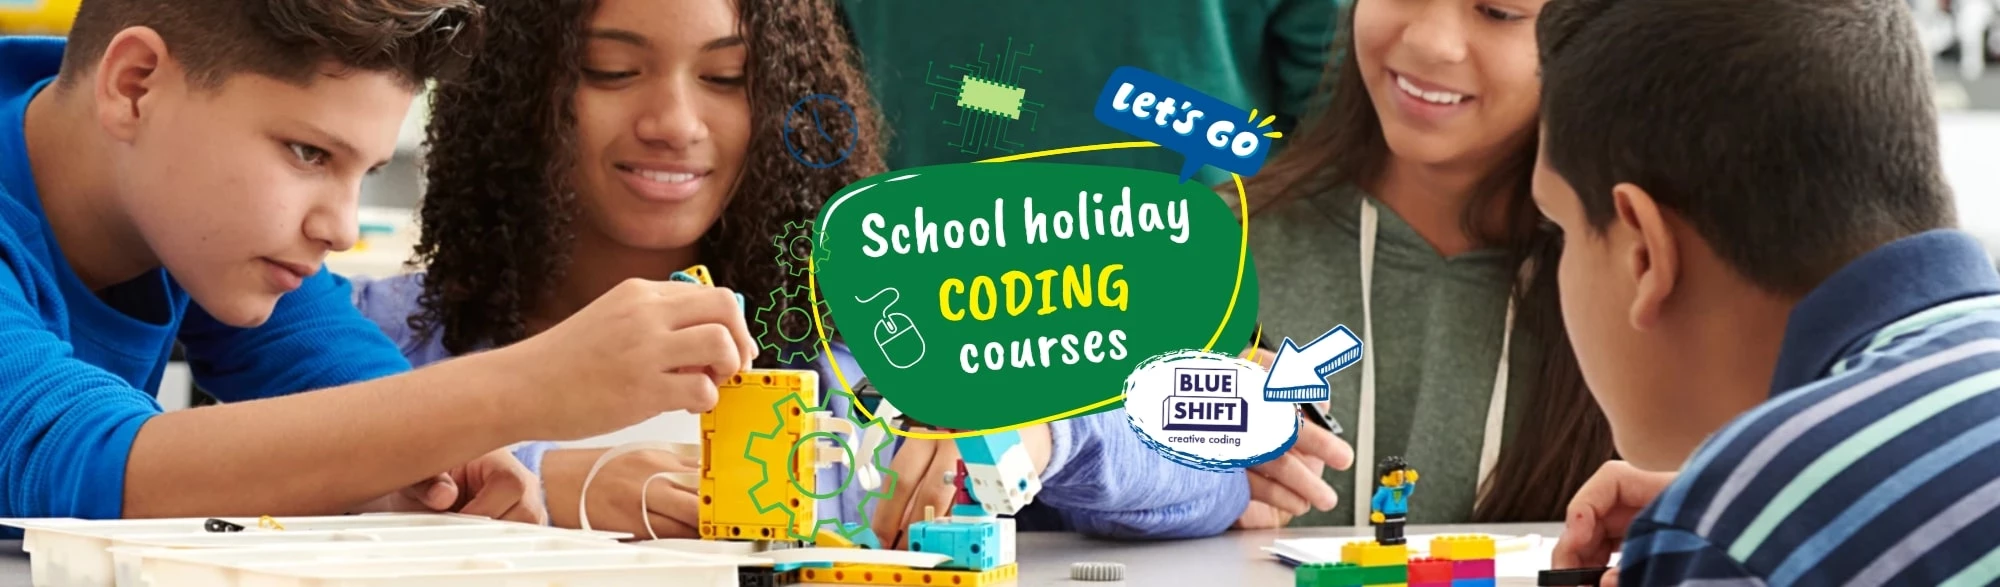 School holiday coding courses